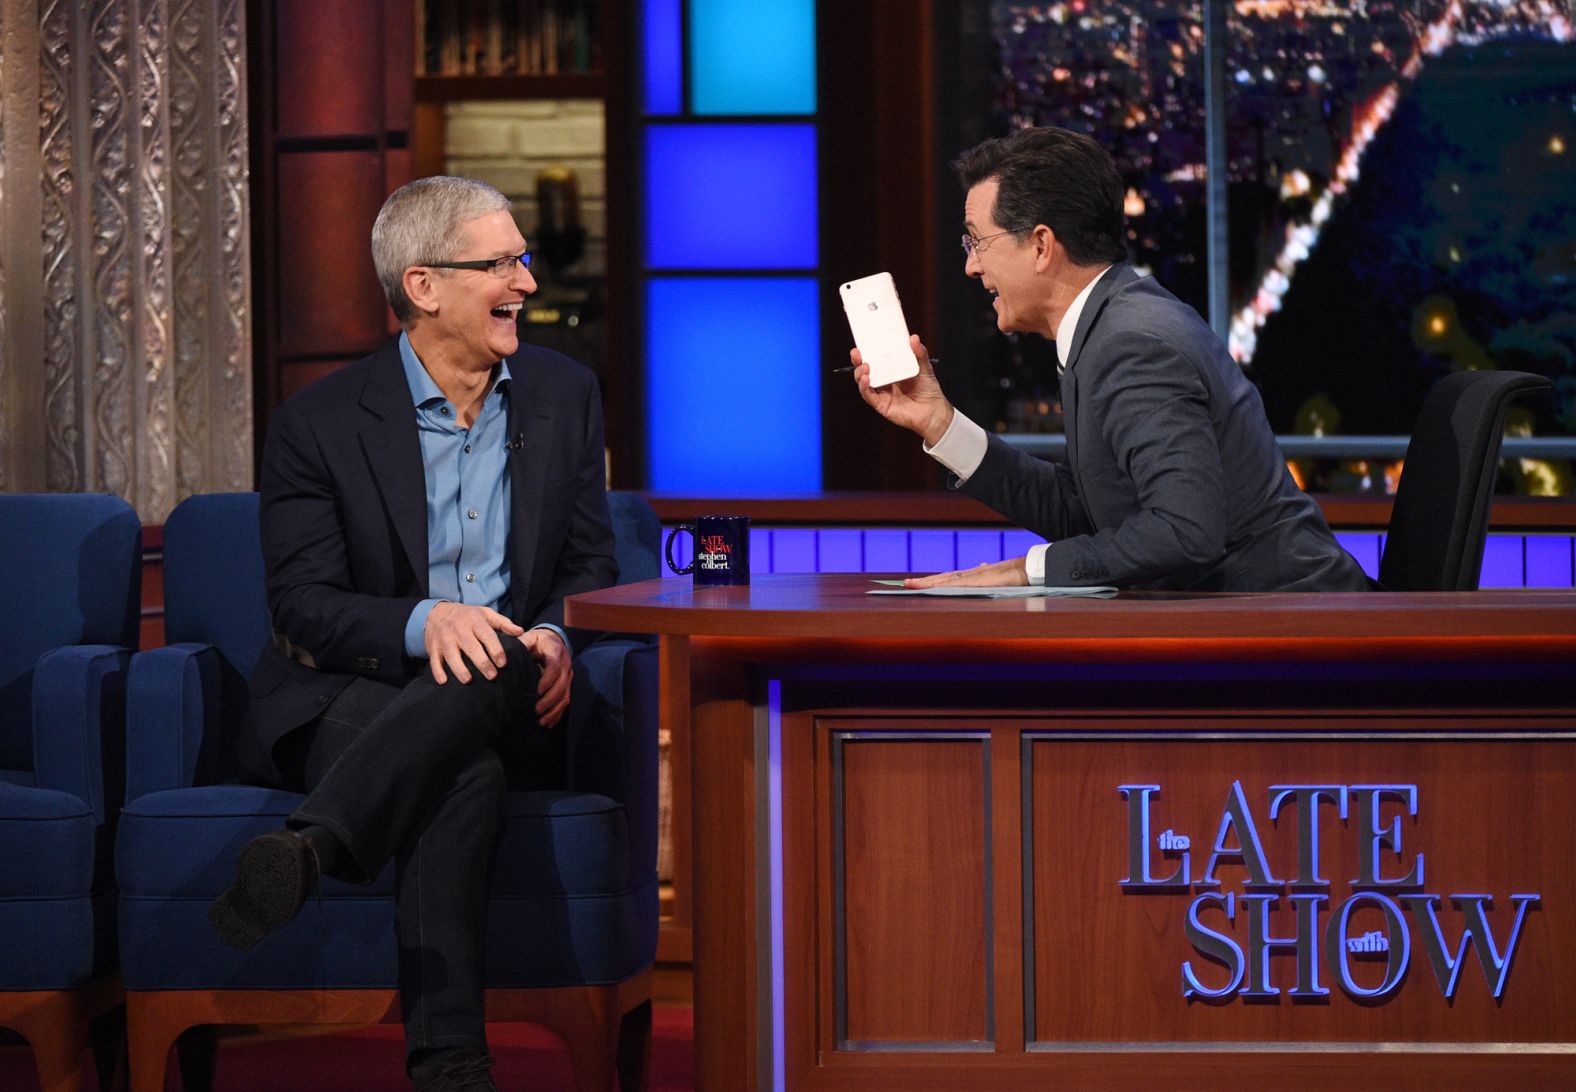 Cook appears as a guest on "The Late Show with Stephen Colbert" in September 2015.